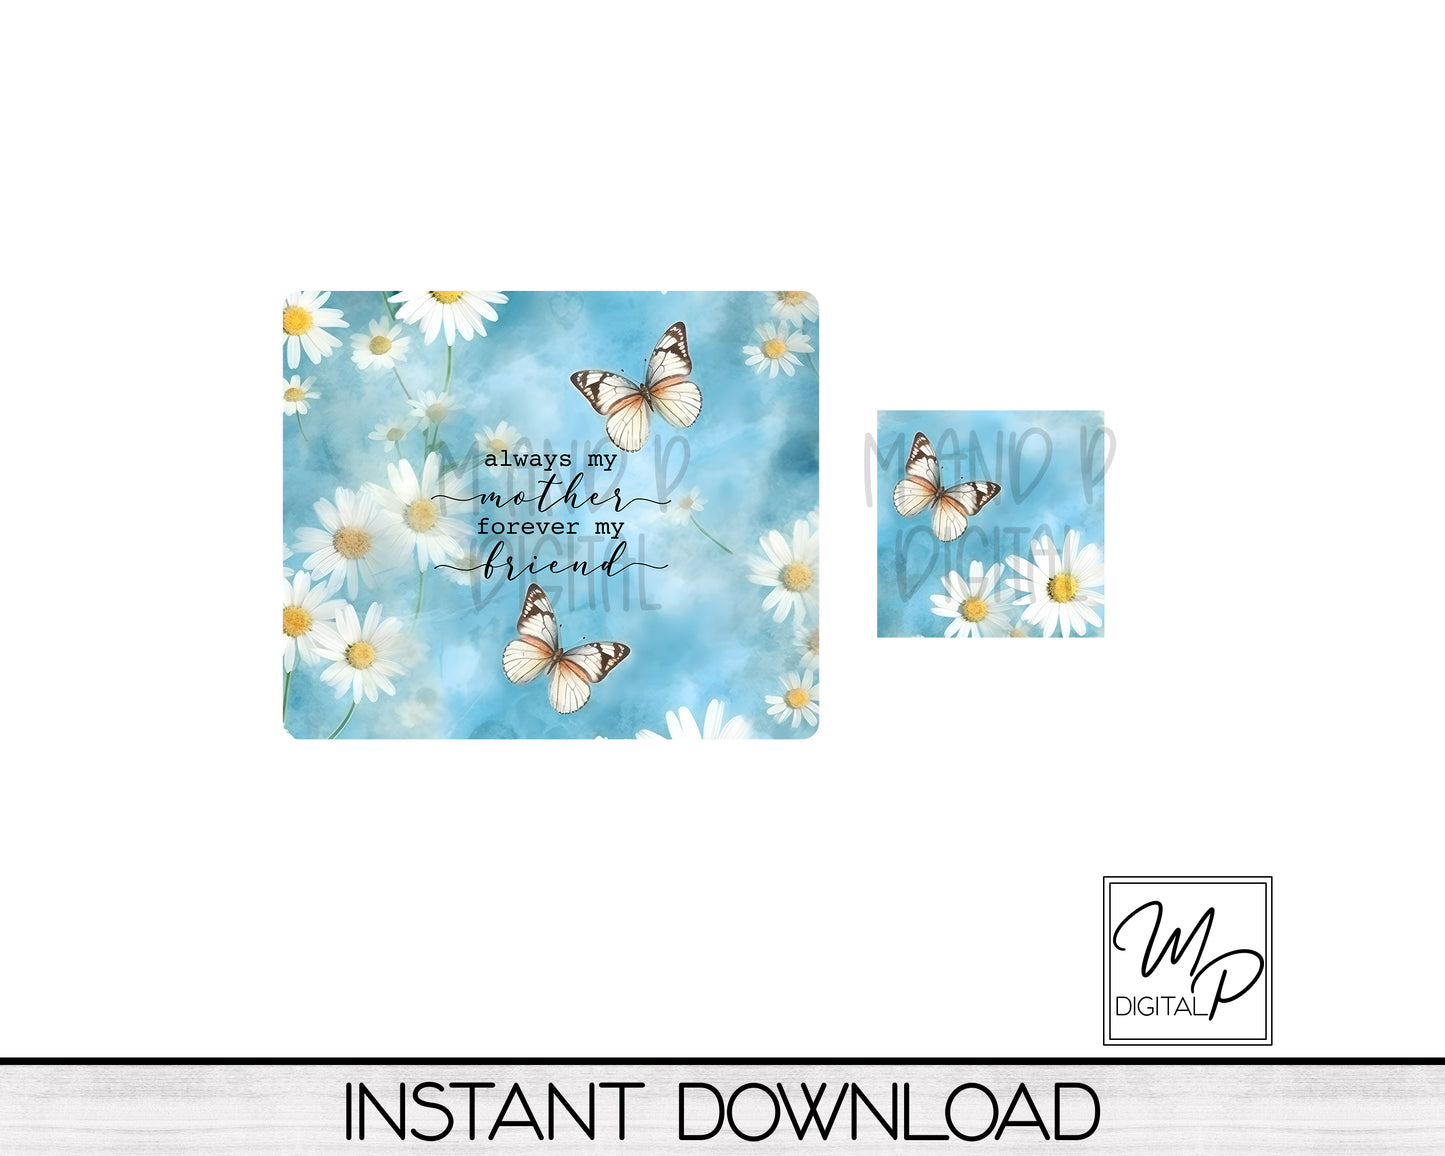 Mom Mousepad and Coaster PNG for Sublimation, Digital Download